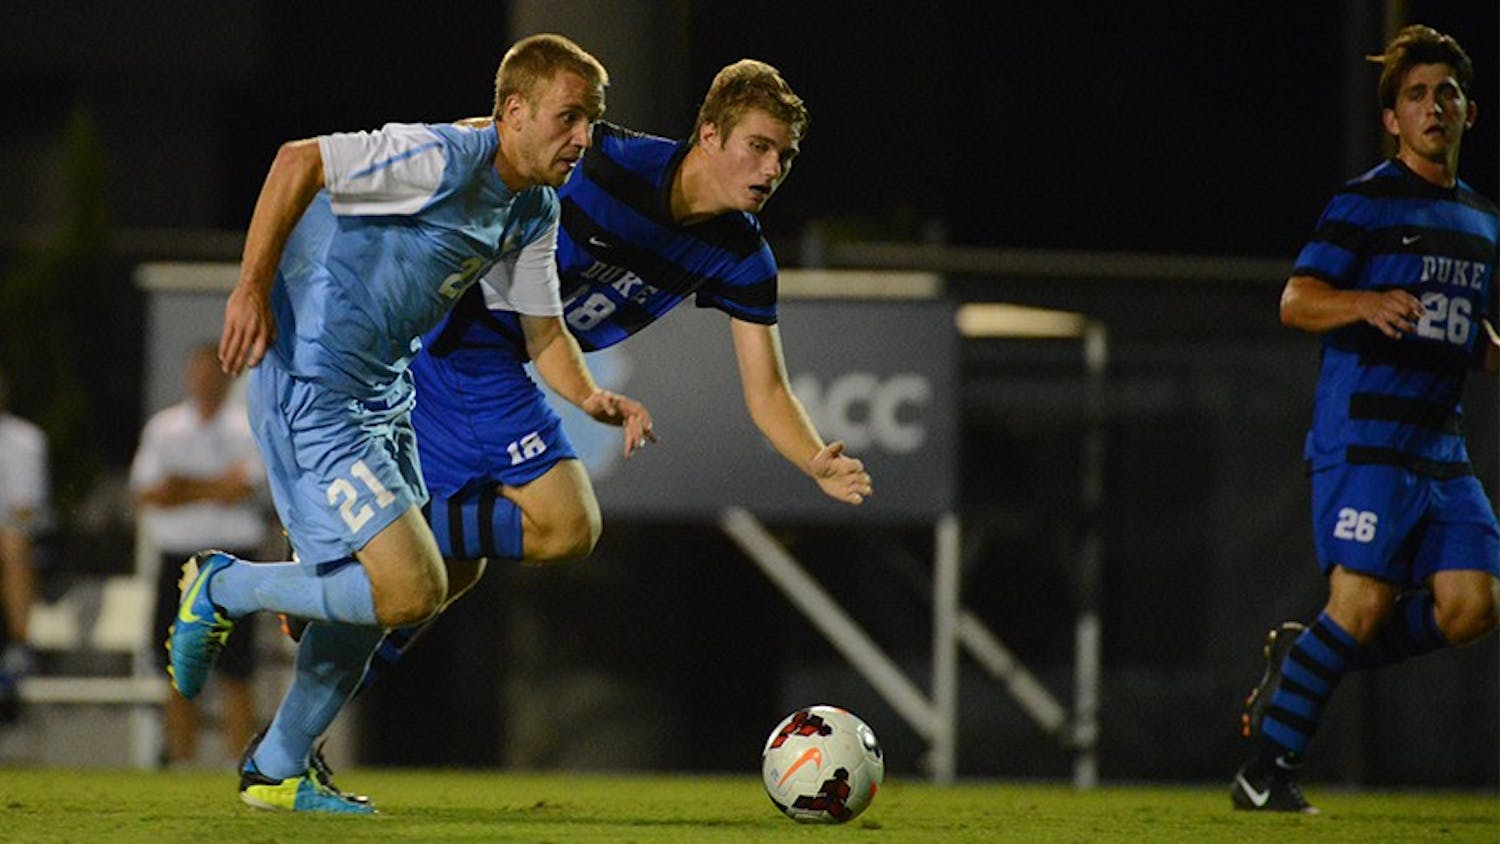 	Cooper Vandermaas-Peeler (left) chases after the ball in UNC’s 0-0 draw against Duke Friday night.